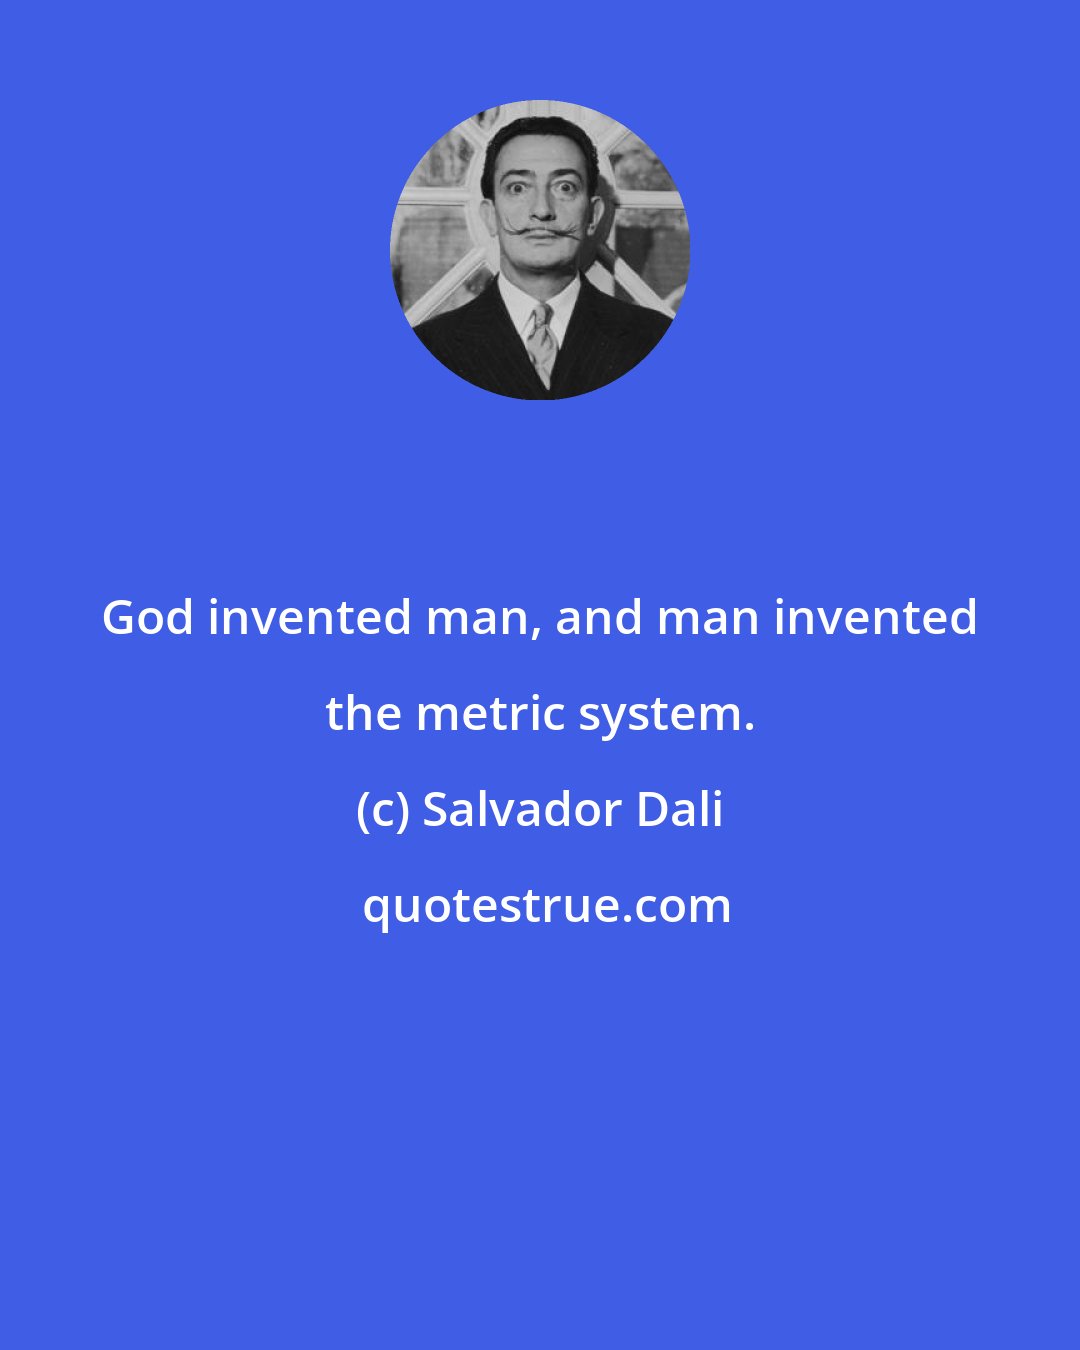 Salvador Dali: God invented man, and man invented the metric system.